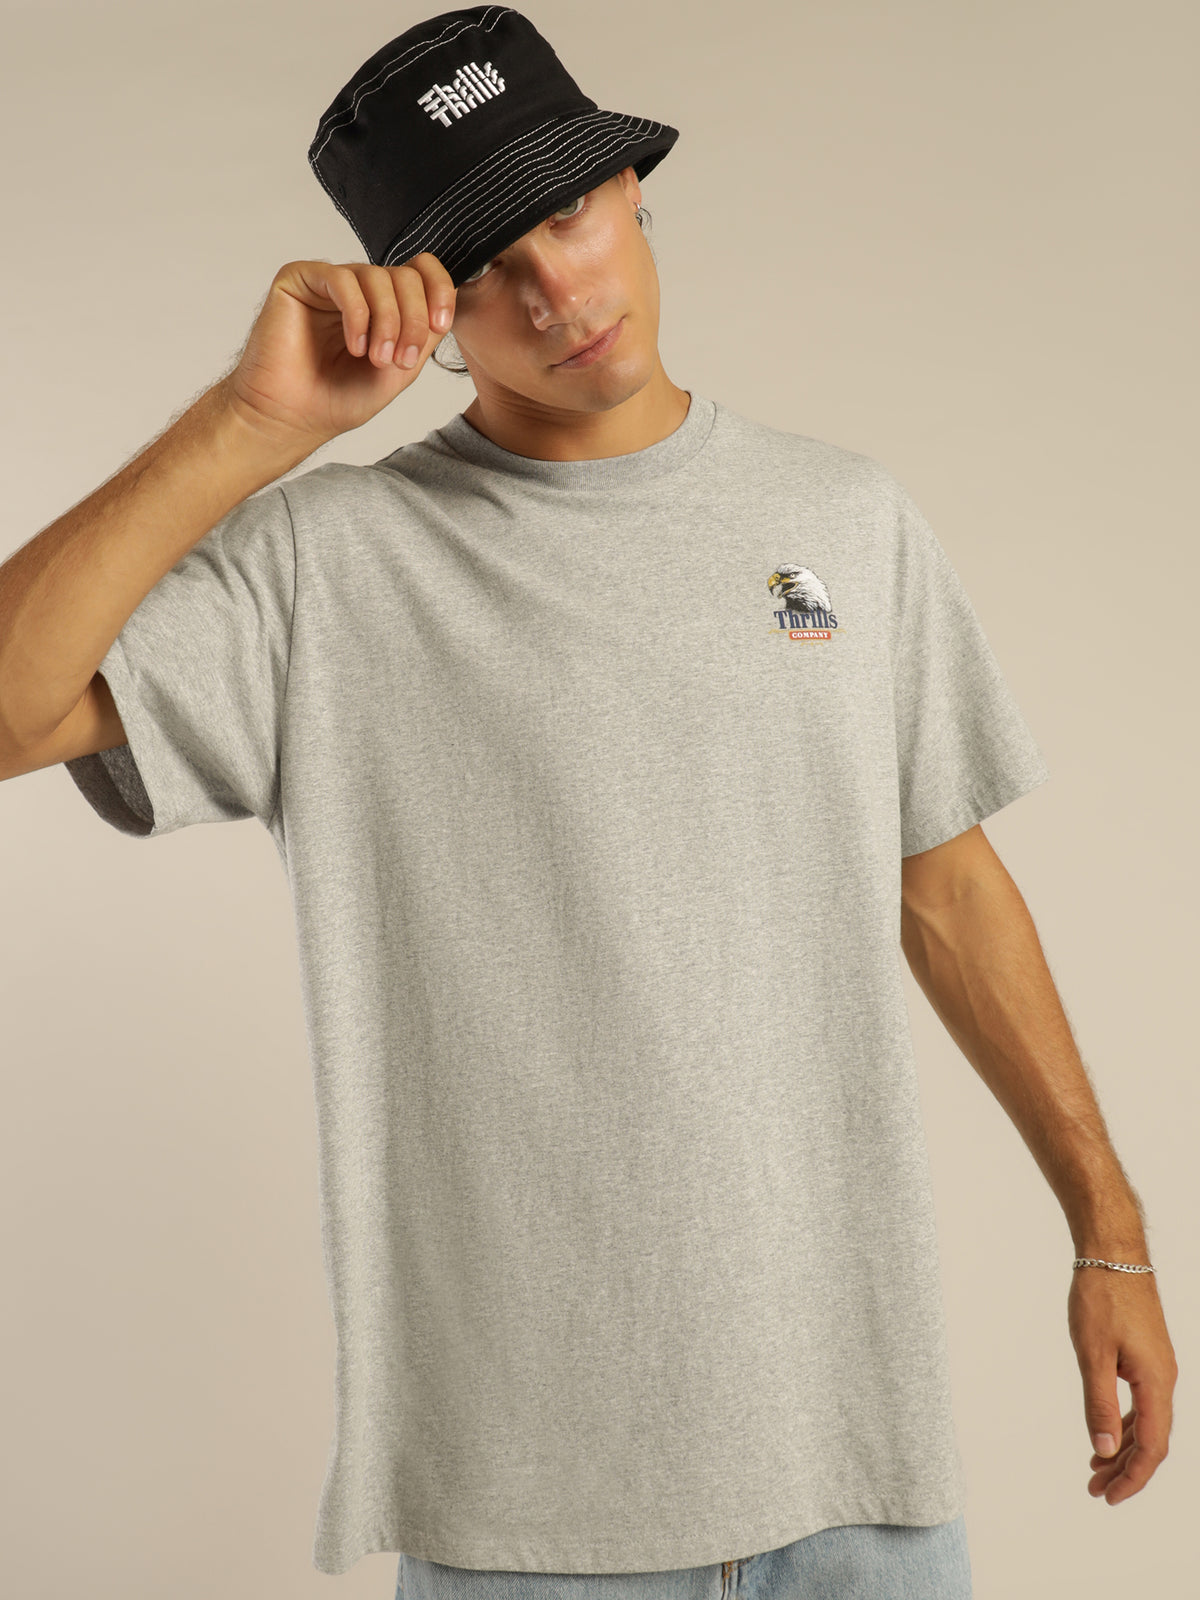 Roadhouse Merch Fit T-Shirt in Grey Marle